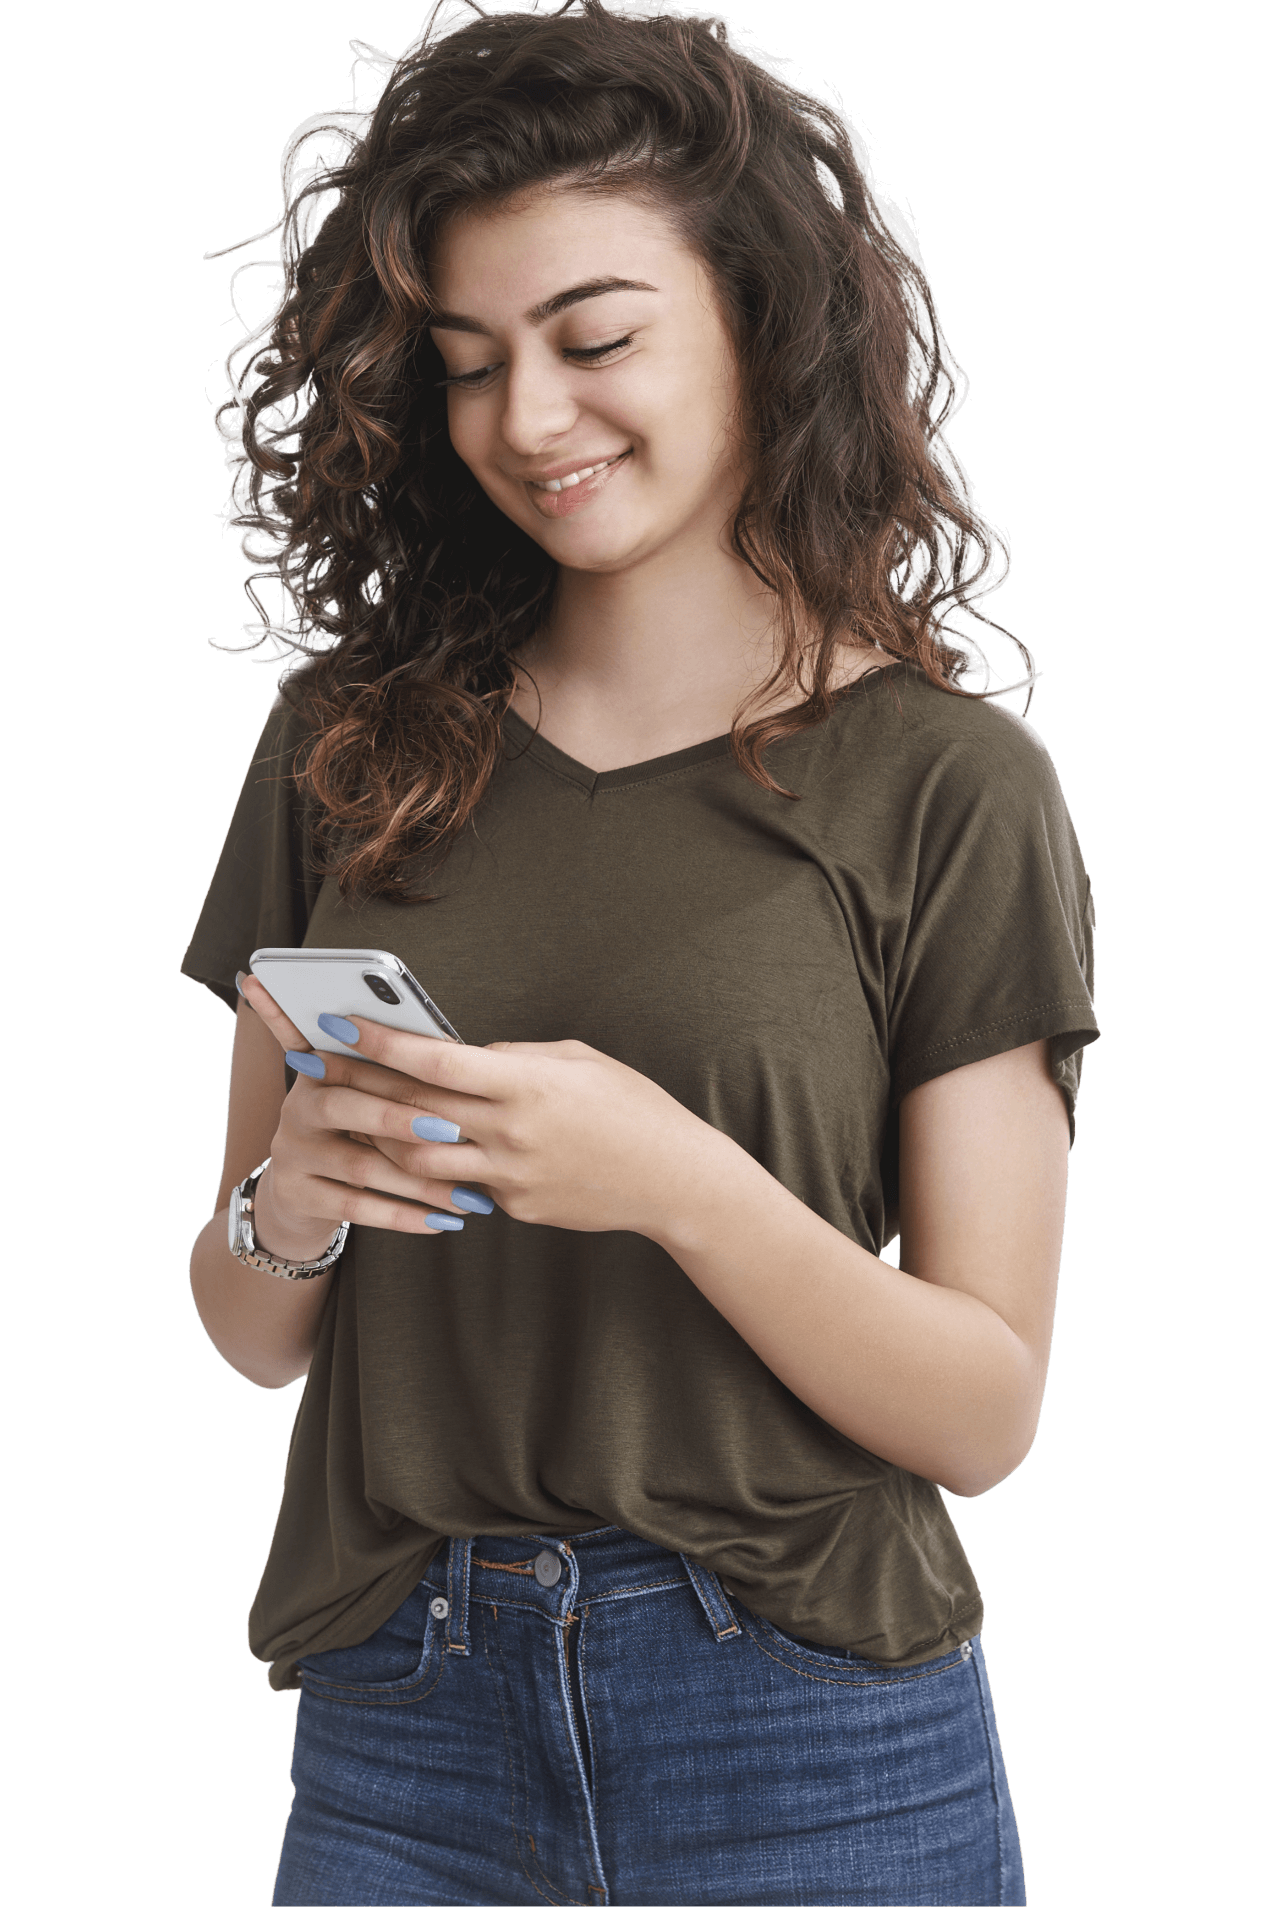 A beautiful girl holding an android smartphone staring at the phone screen displaying an android app interface developed by custom android app development company - Technocrats Horizons